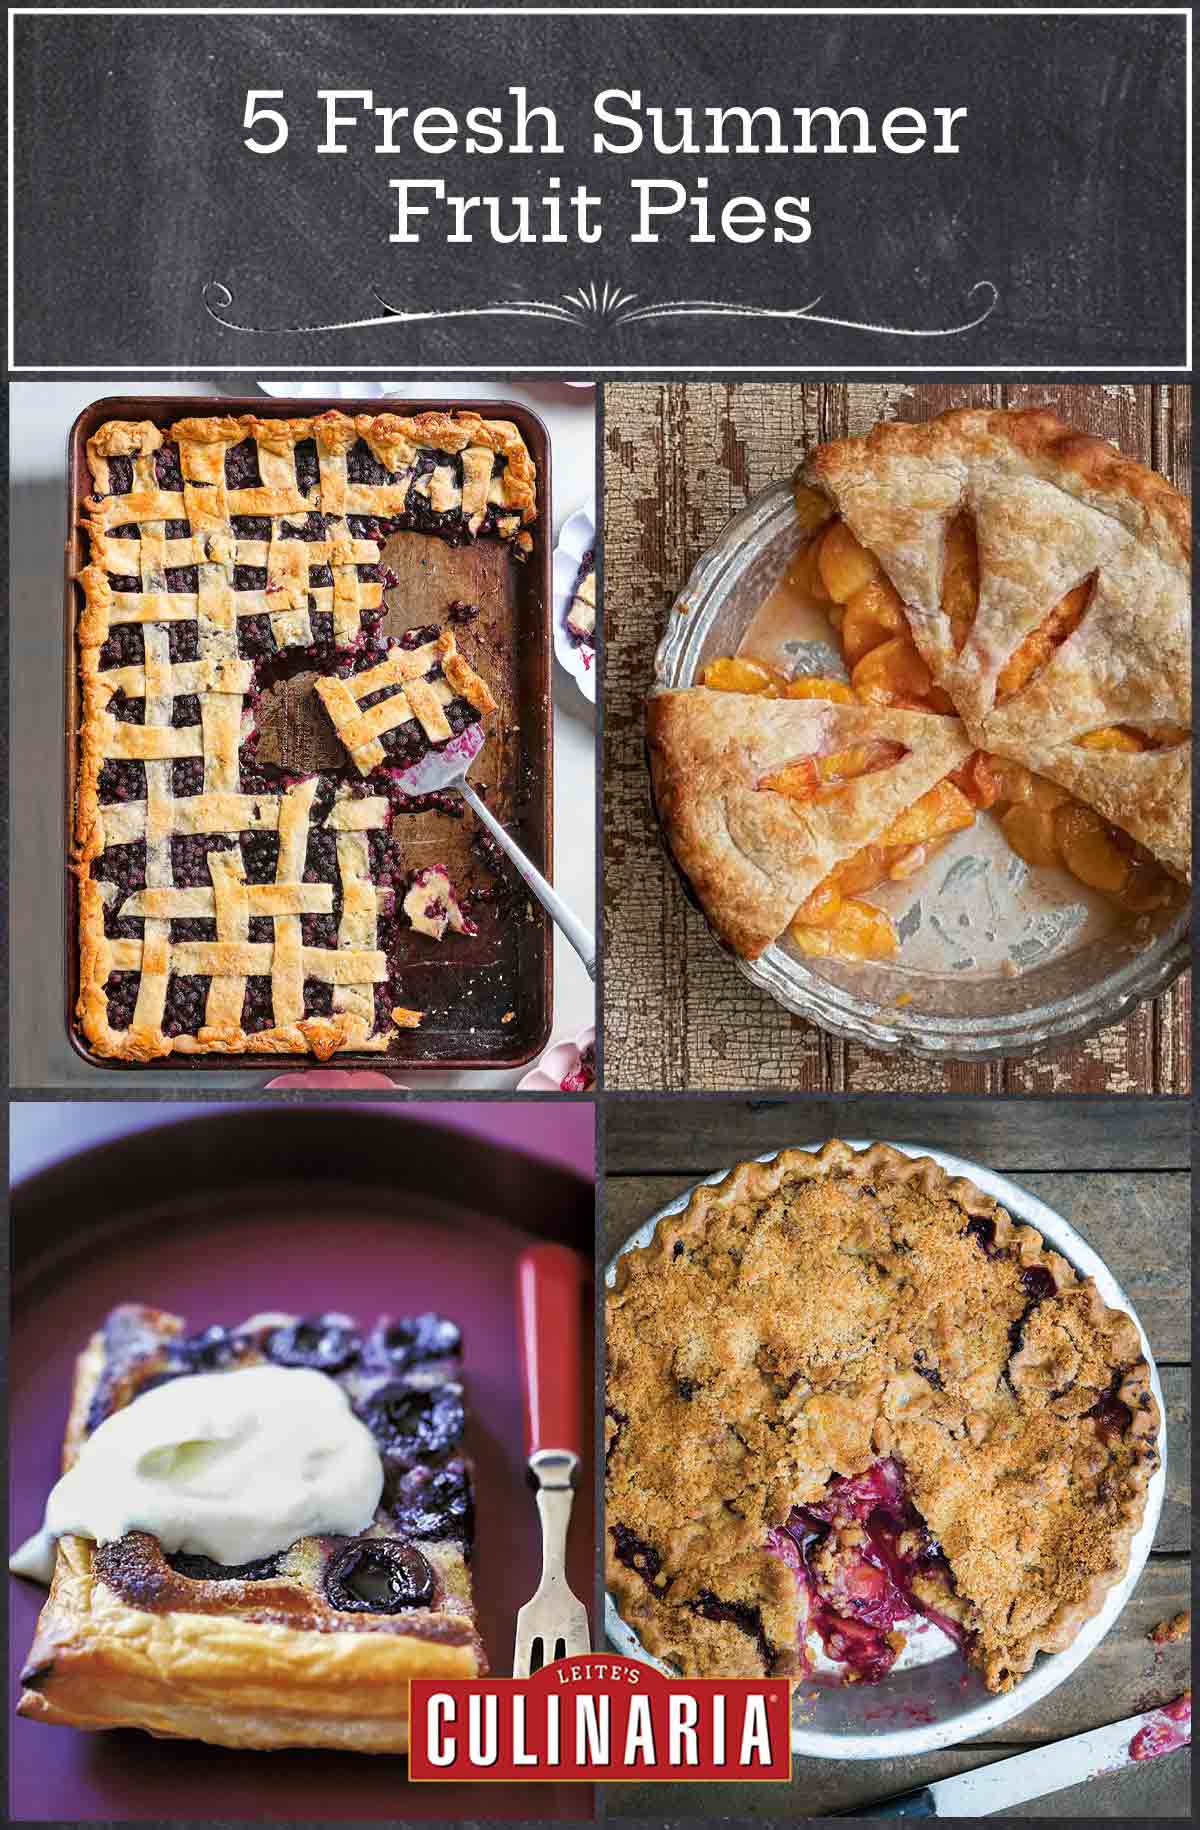 Images of four summer fruit pies -- blueberry slab pie, fresh peach pie, cherry tart, and plum crumble pie.